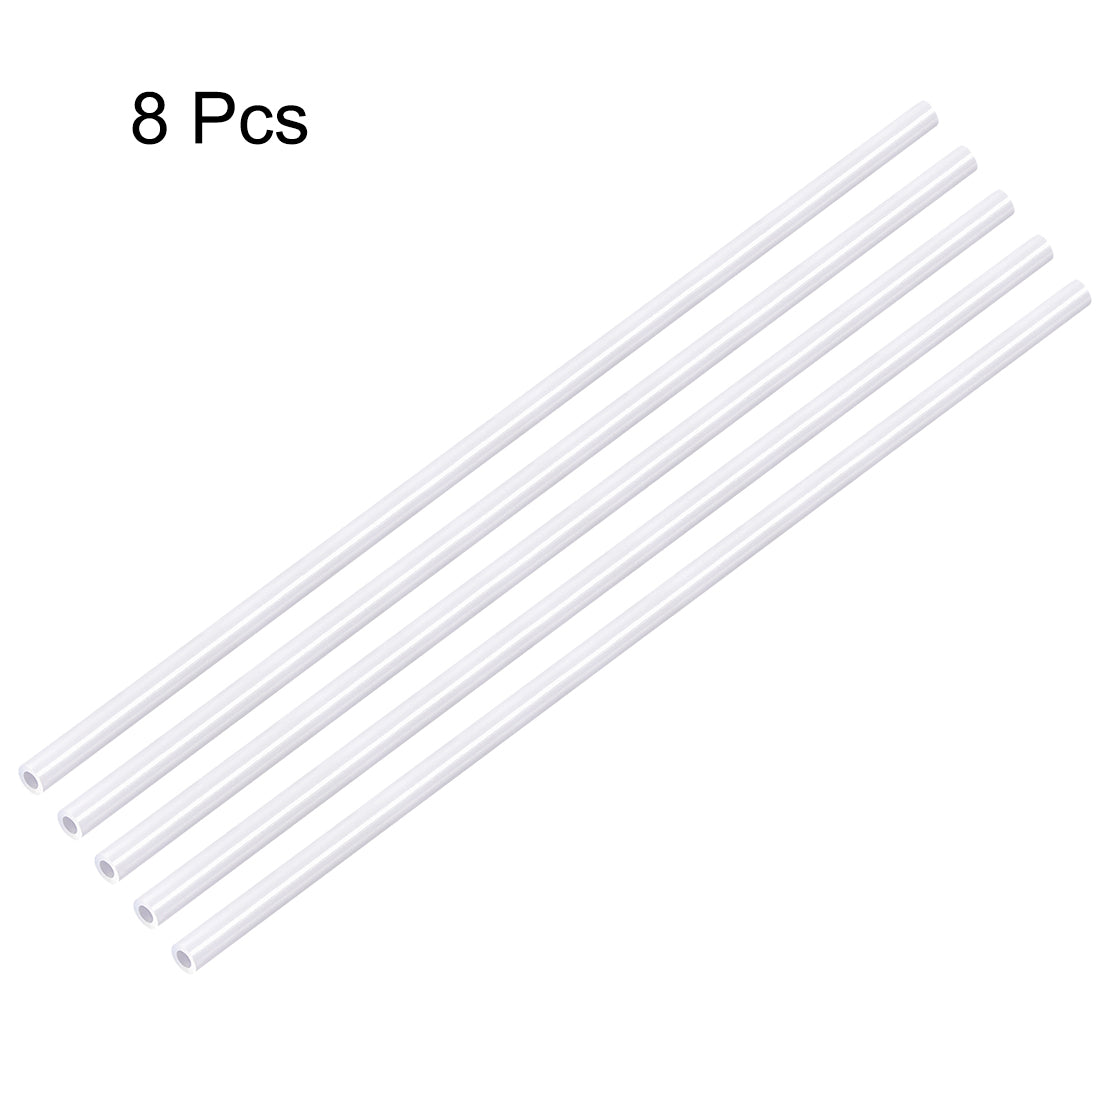 uxcell Uxcell ABS Model Round Tubing,2mm Diameter,0.5M/1.64Ft Length,for Architectural Model Layout Making Materials,8pcs